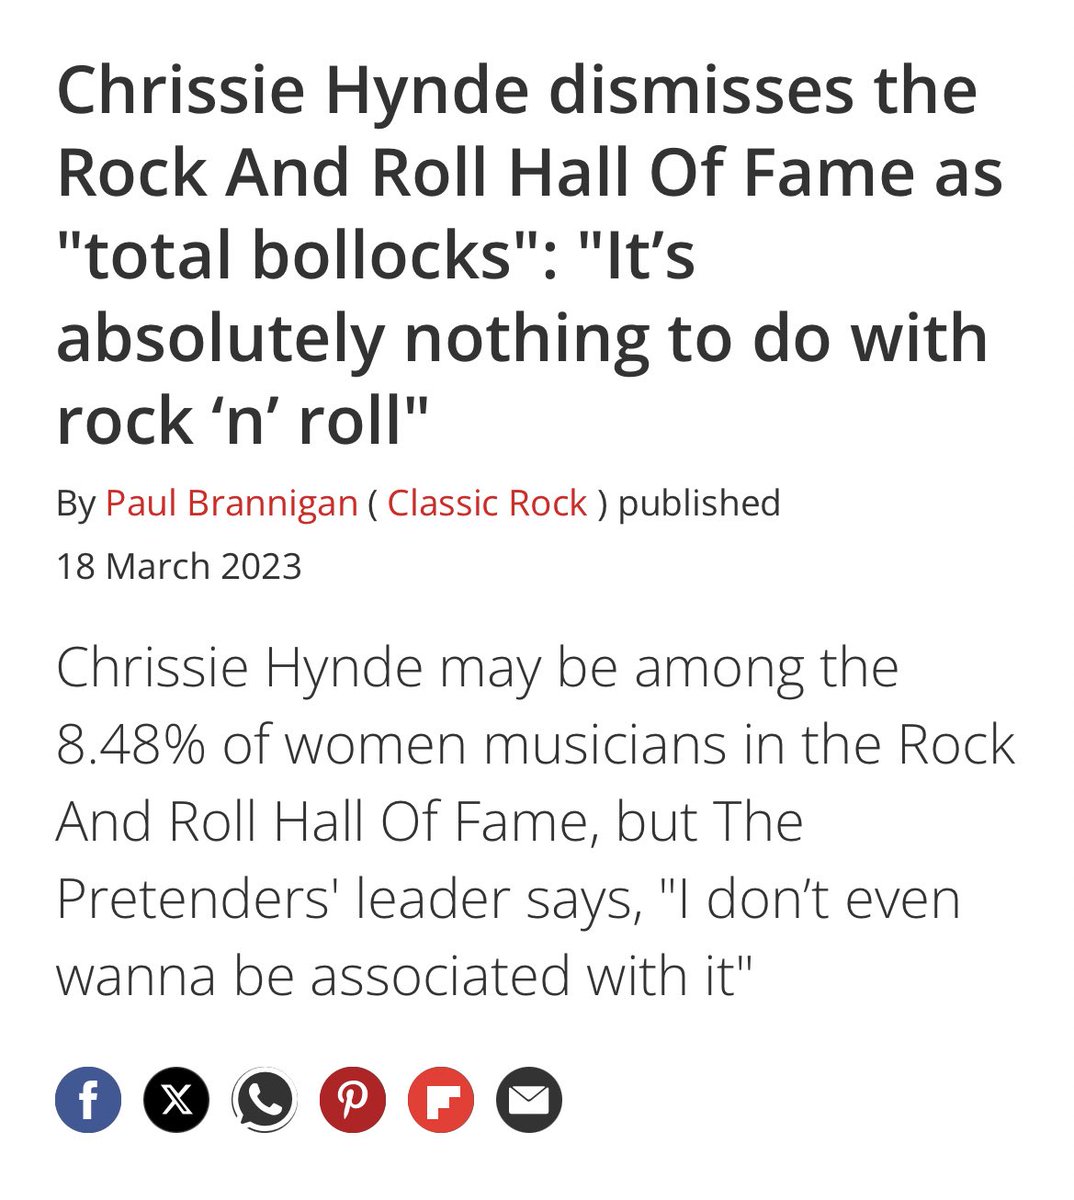 Lots of music fans upset about certain artists not being inducted to the Rock and Roll Hall of Fame. Here’s Chrissie Hynde from last year, being correct, as always.